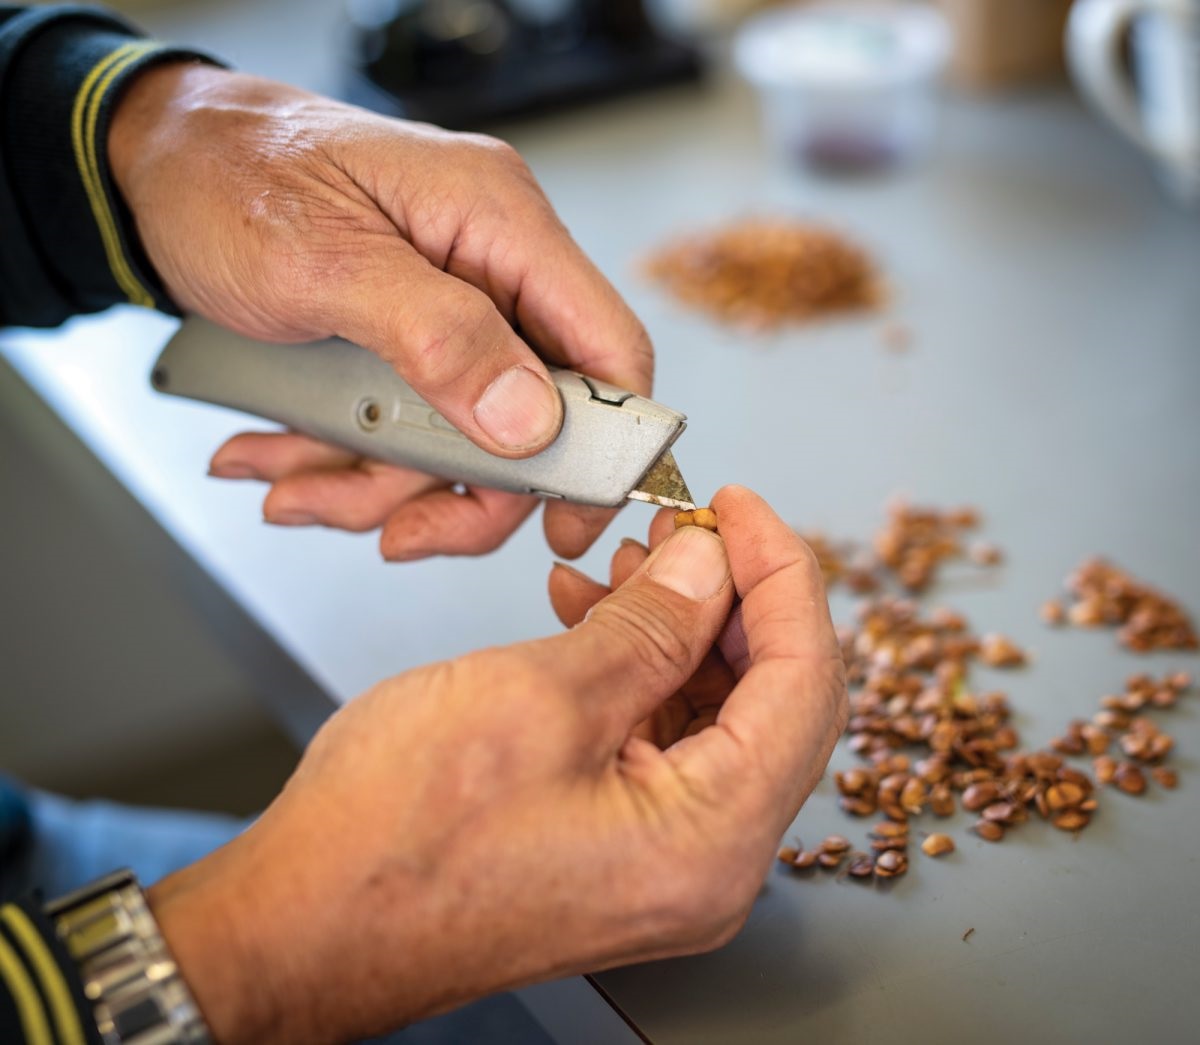 native seeds are extracted from pods by volunteer Noel Pearson